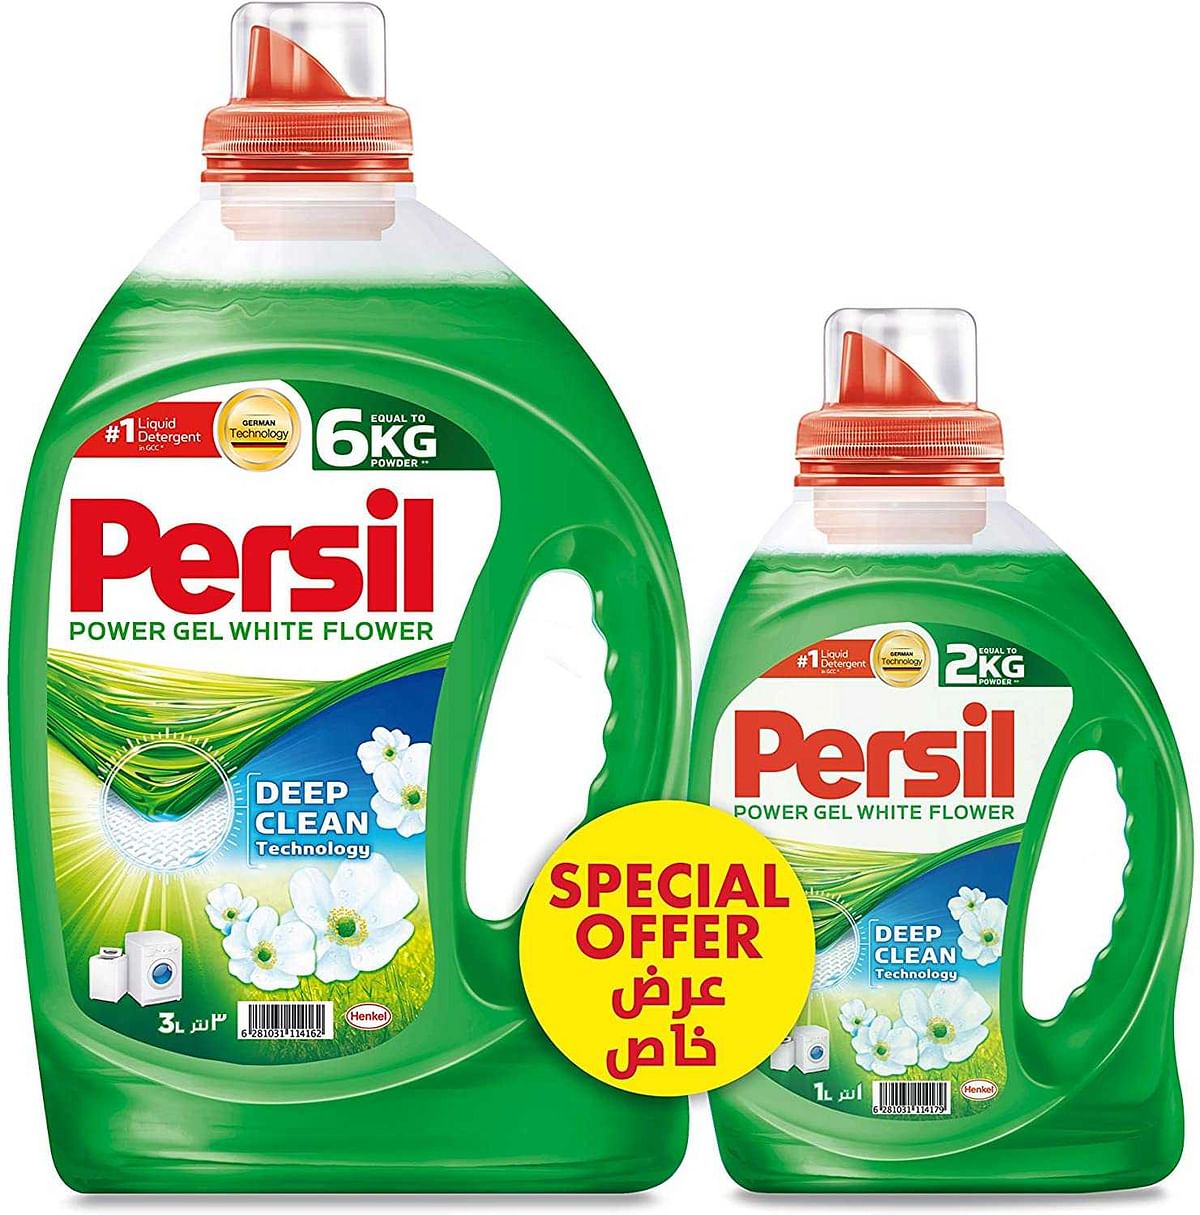 Persil Power Gel White Flower Deep Clean Detergent 3L and 1L